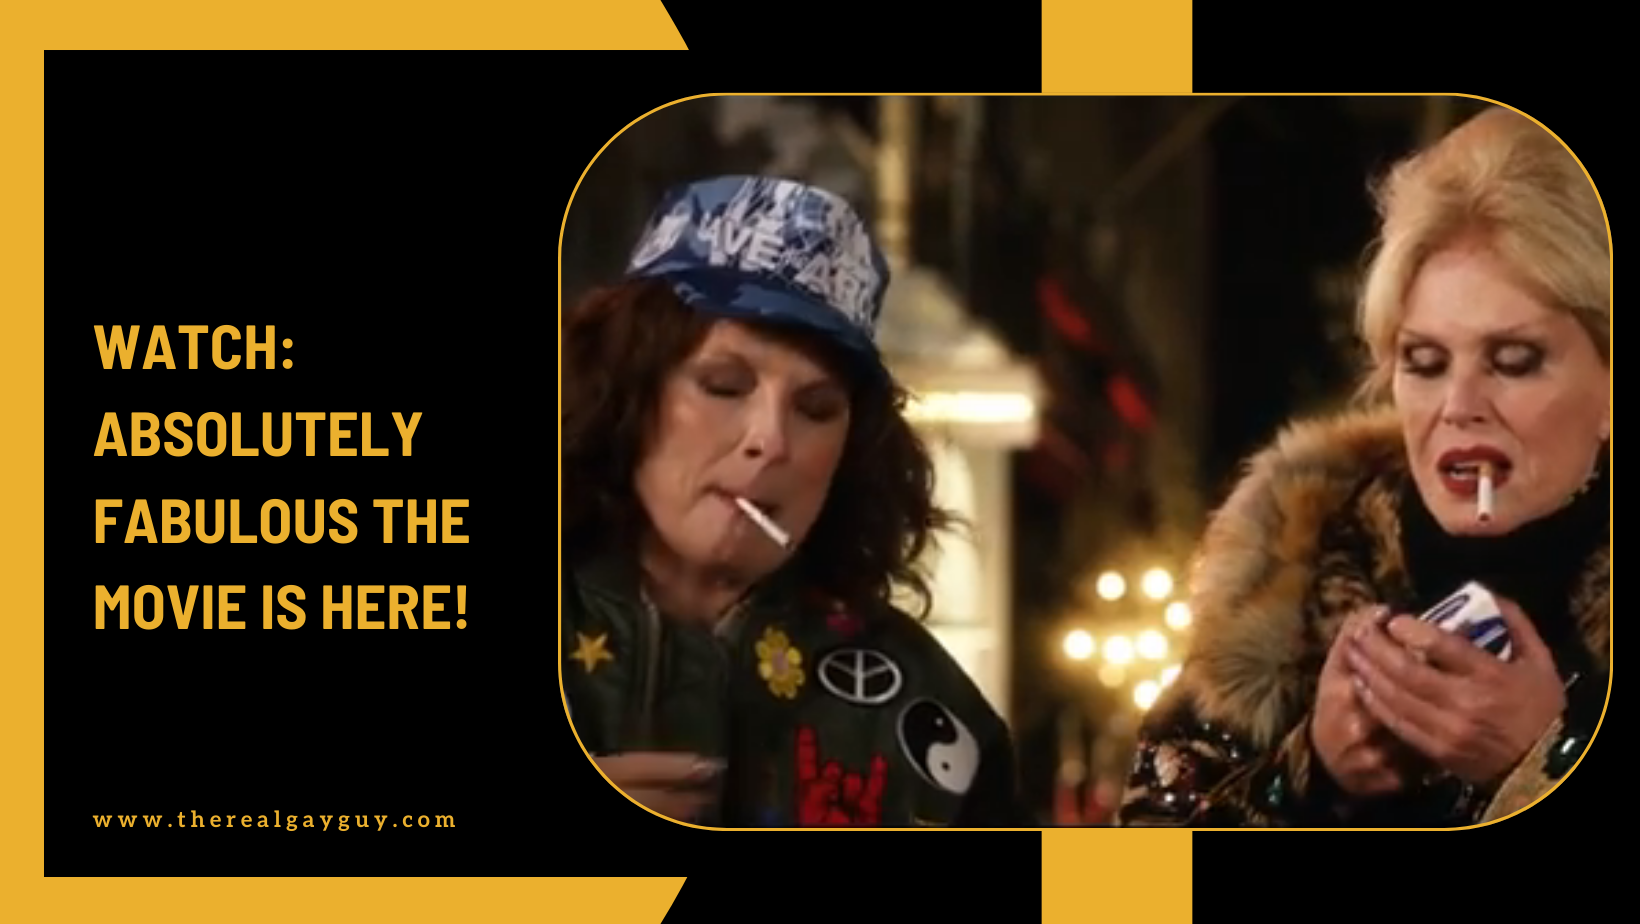 WATCH: Absolutely Fabulous the Movie is Here!